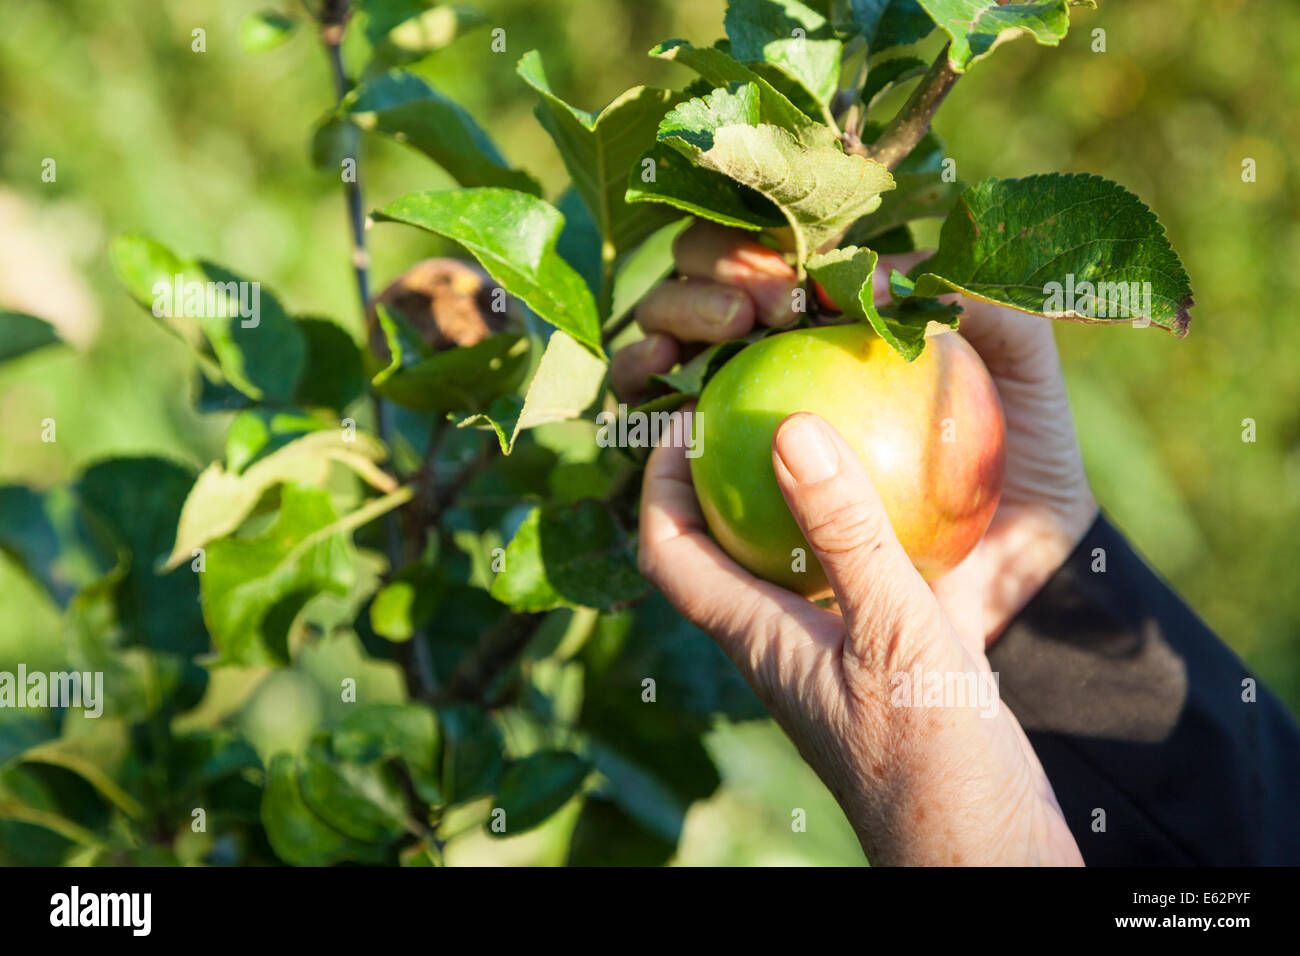 Apple picking. A person picking apples from a tree in the UK Stock Photo